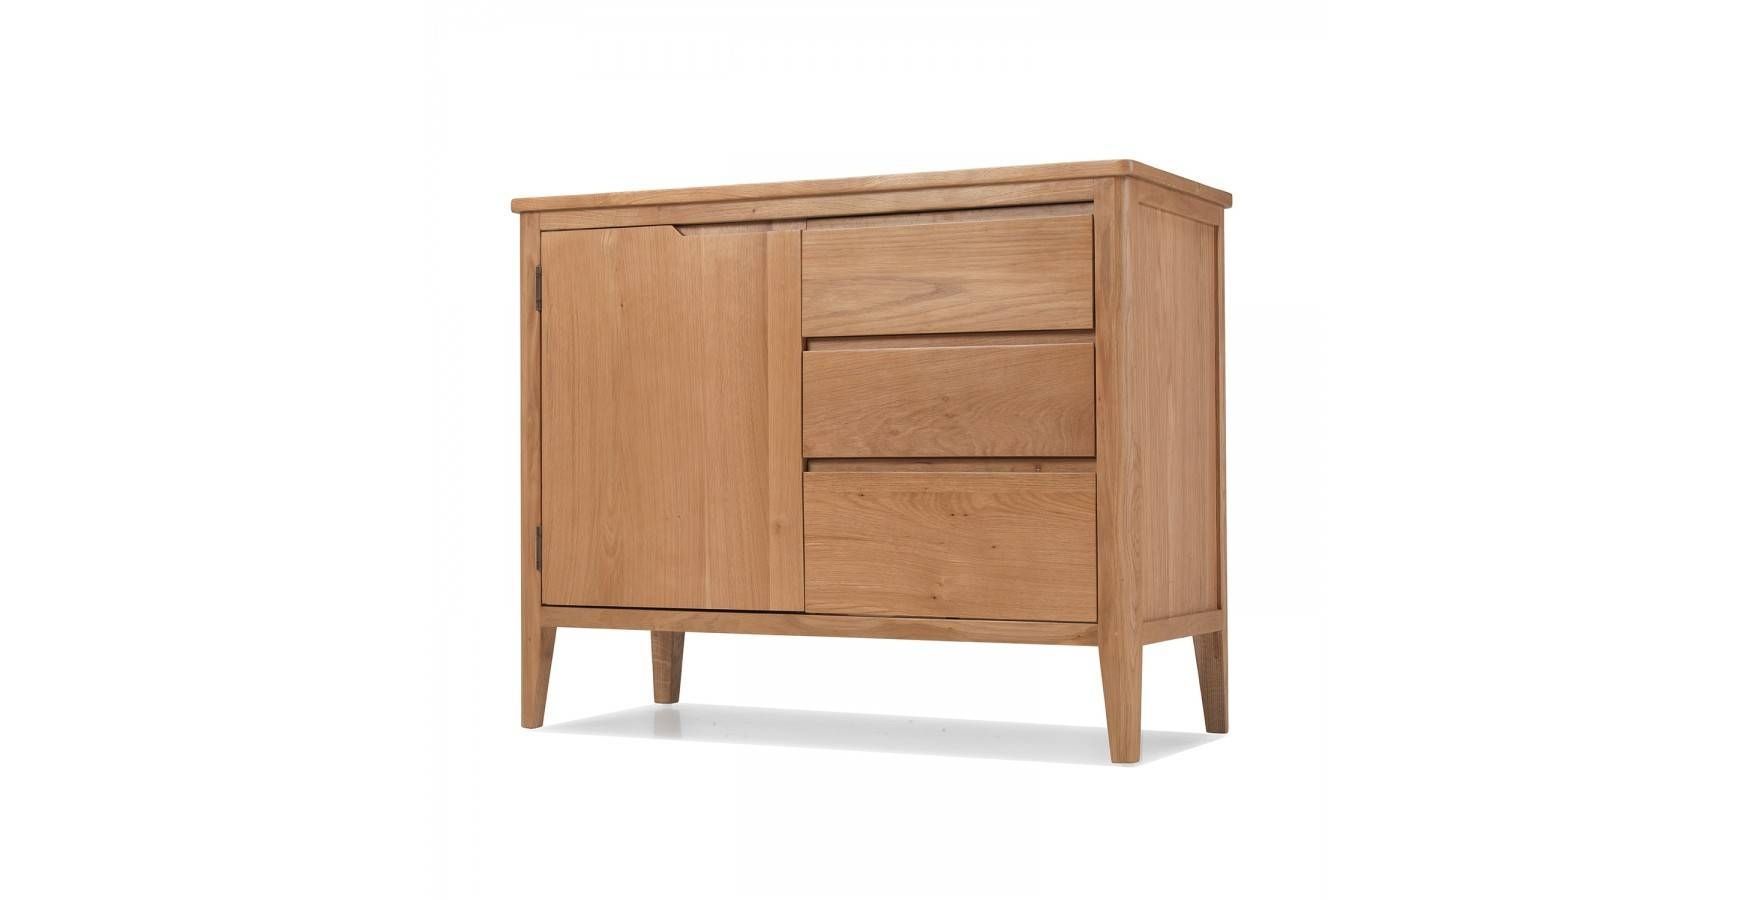 Cadley Oak Small Sideboard With Drawers – Lifestyle Furniture Uk Throughout Small Sideboards With Drawers (View 8 of 30)